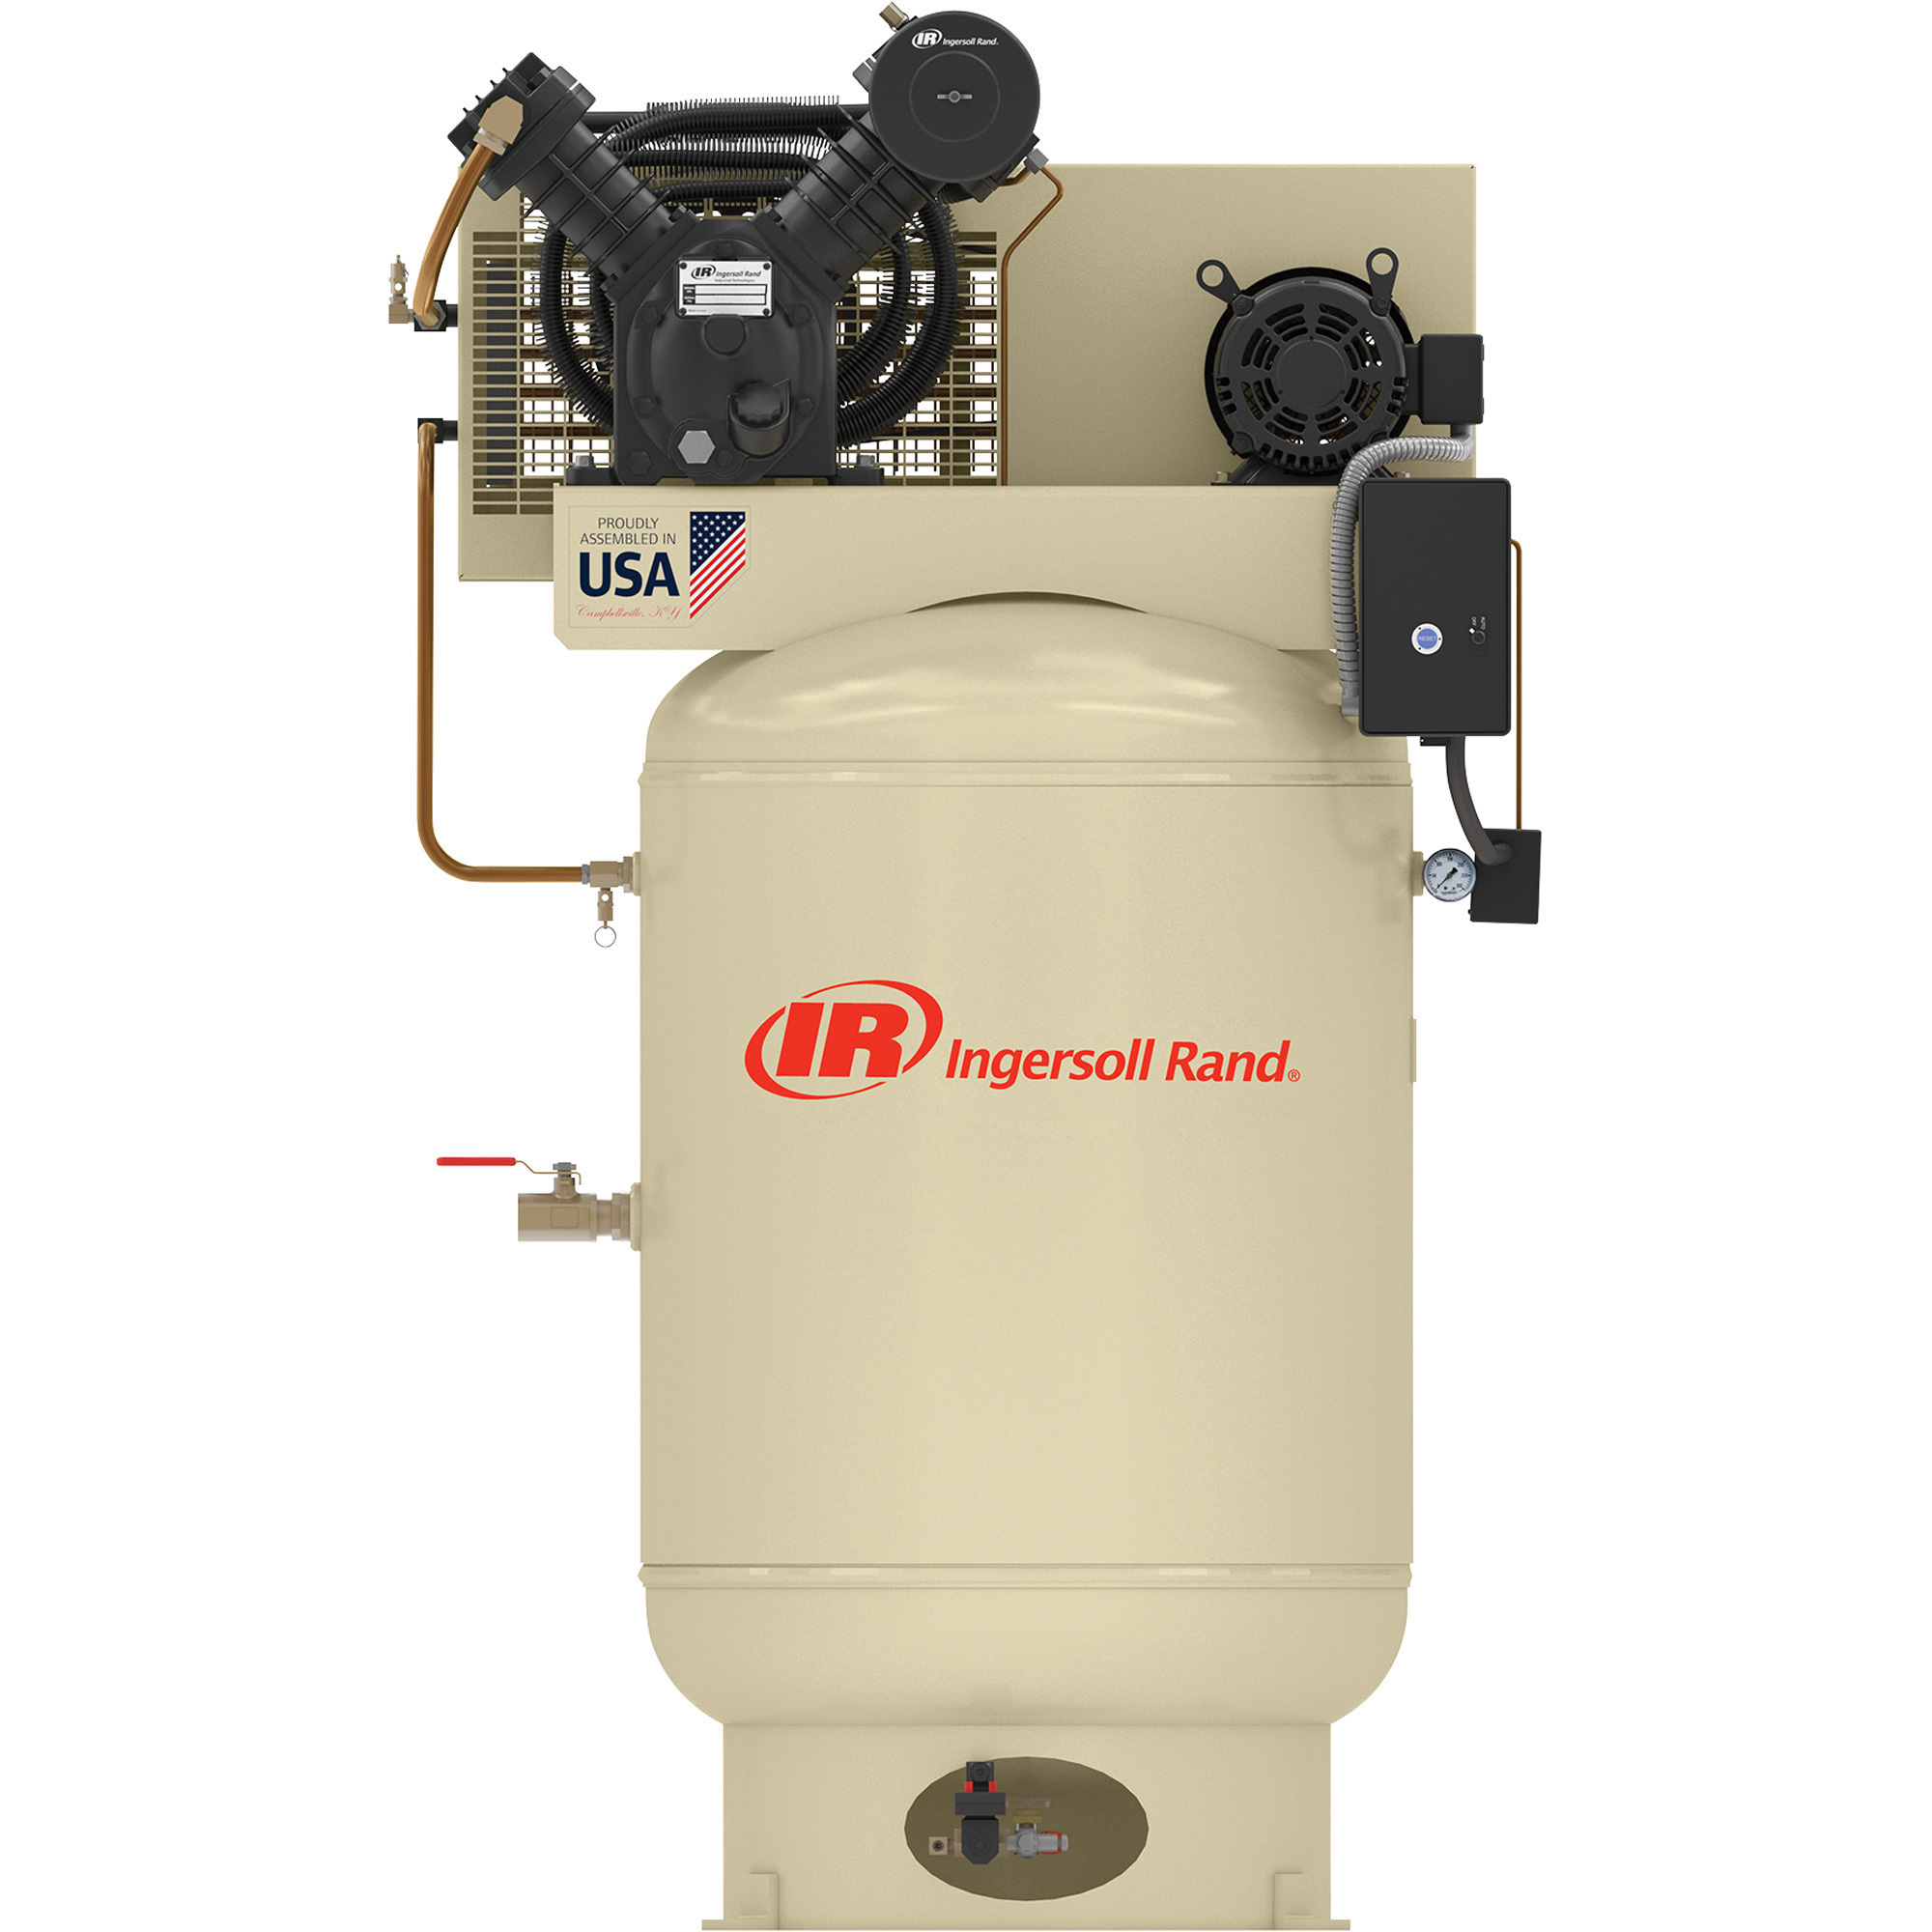 Ingersoll Rand Electric Two-Stage Air Compressor, Premium Value Package, 10 HP, 430 Volt, 3-Phase, 120 Gallon Vertical, Model 2545K10-VP 460/3/60